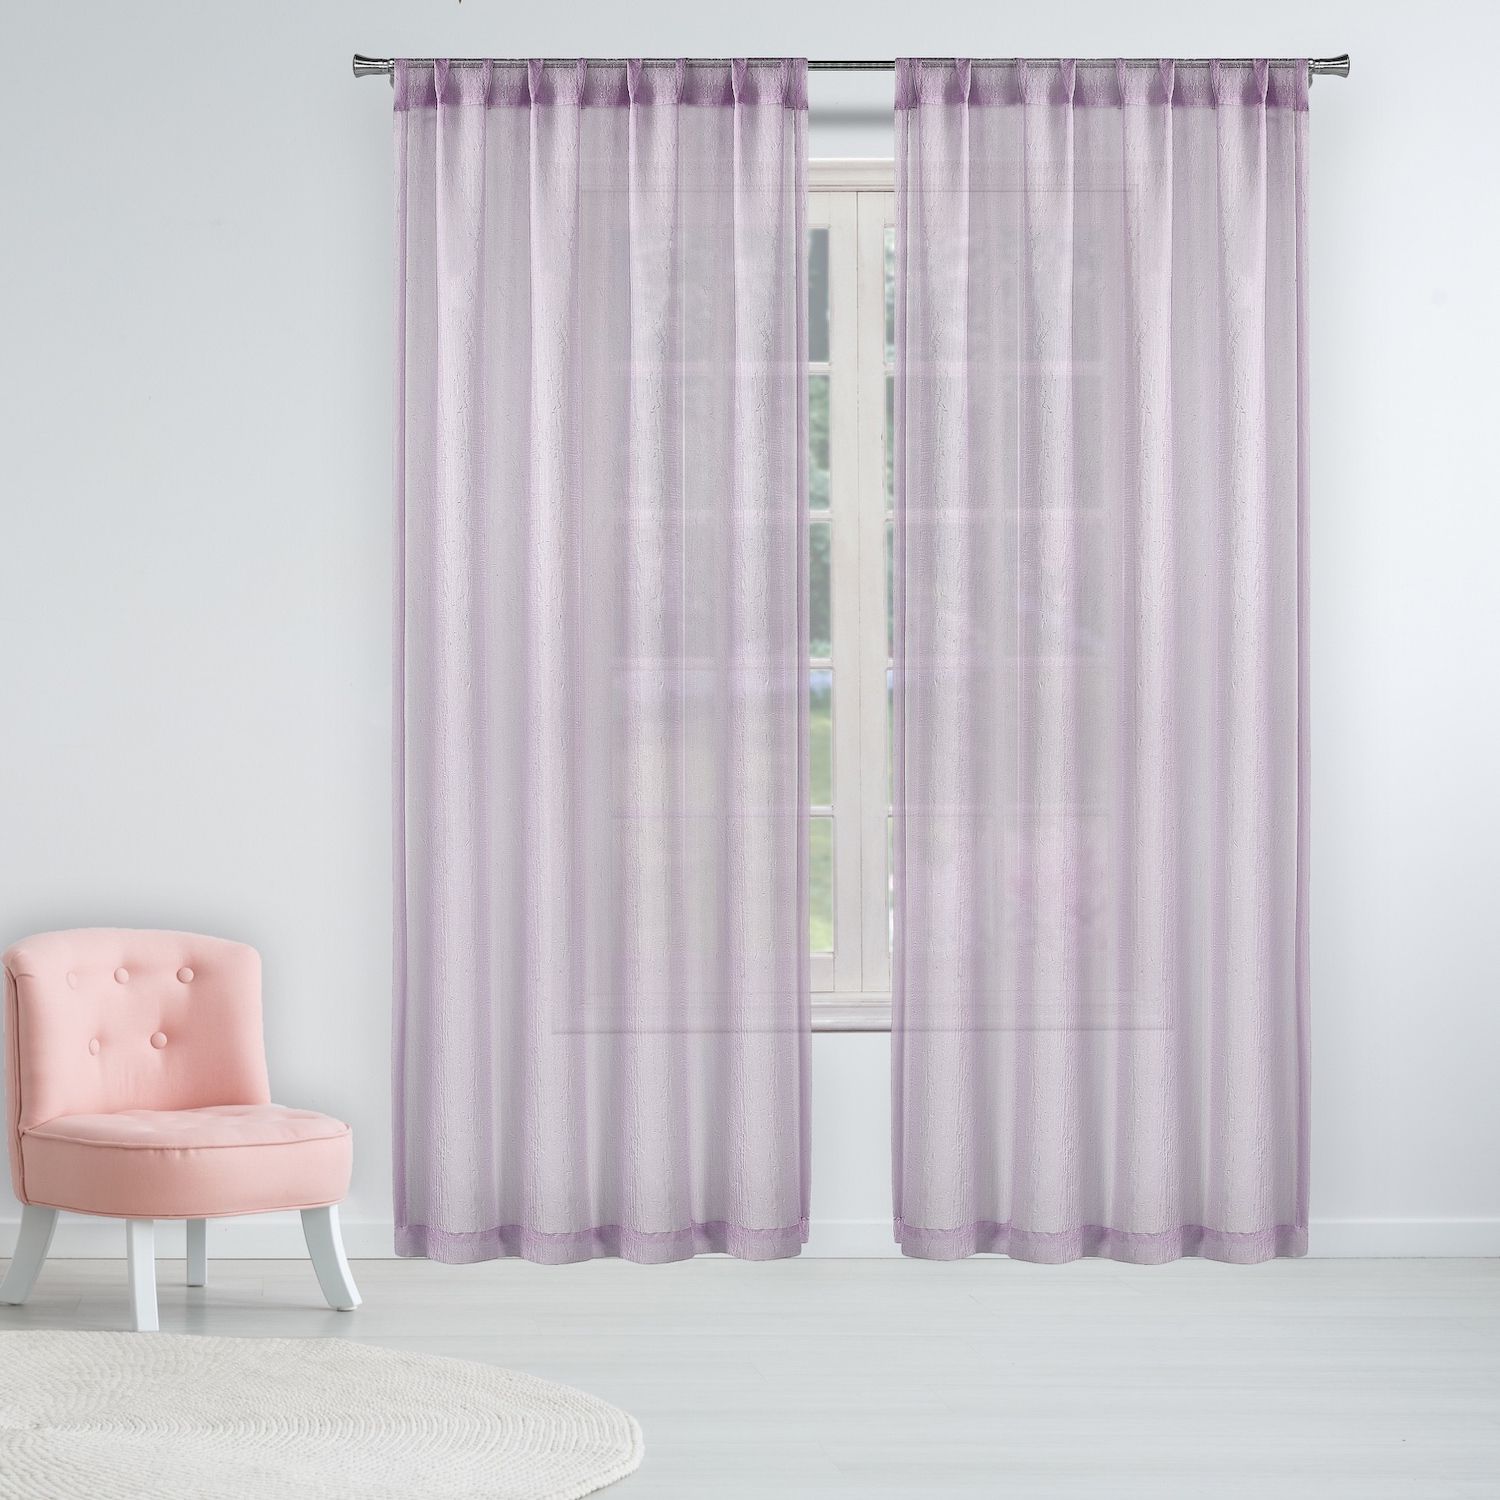 Image for Duck River Textile Allyson Retardant 2-pack Window Curtain Set at Kohl's.